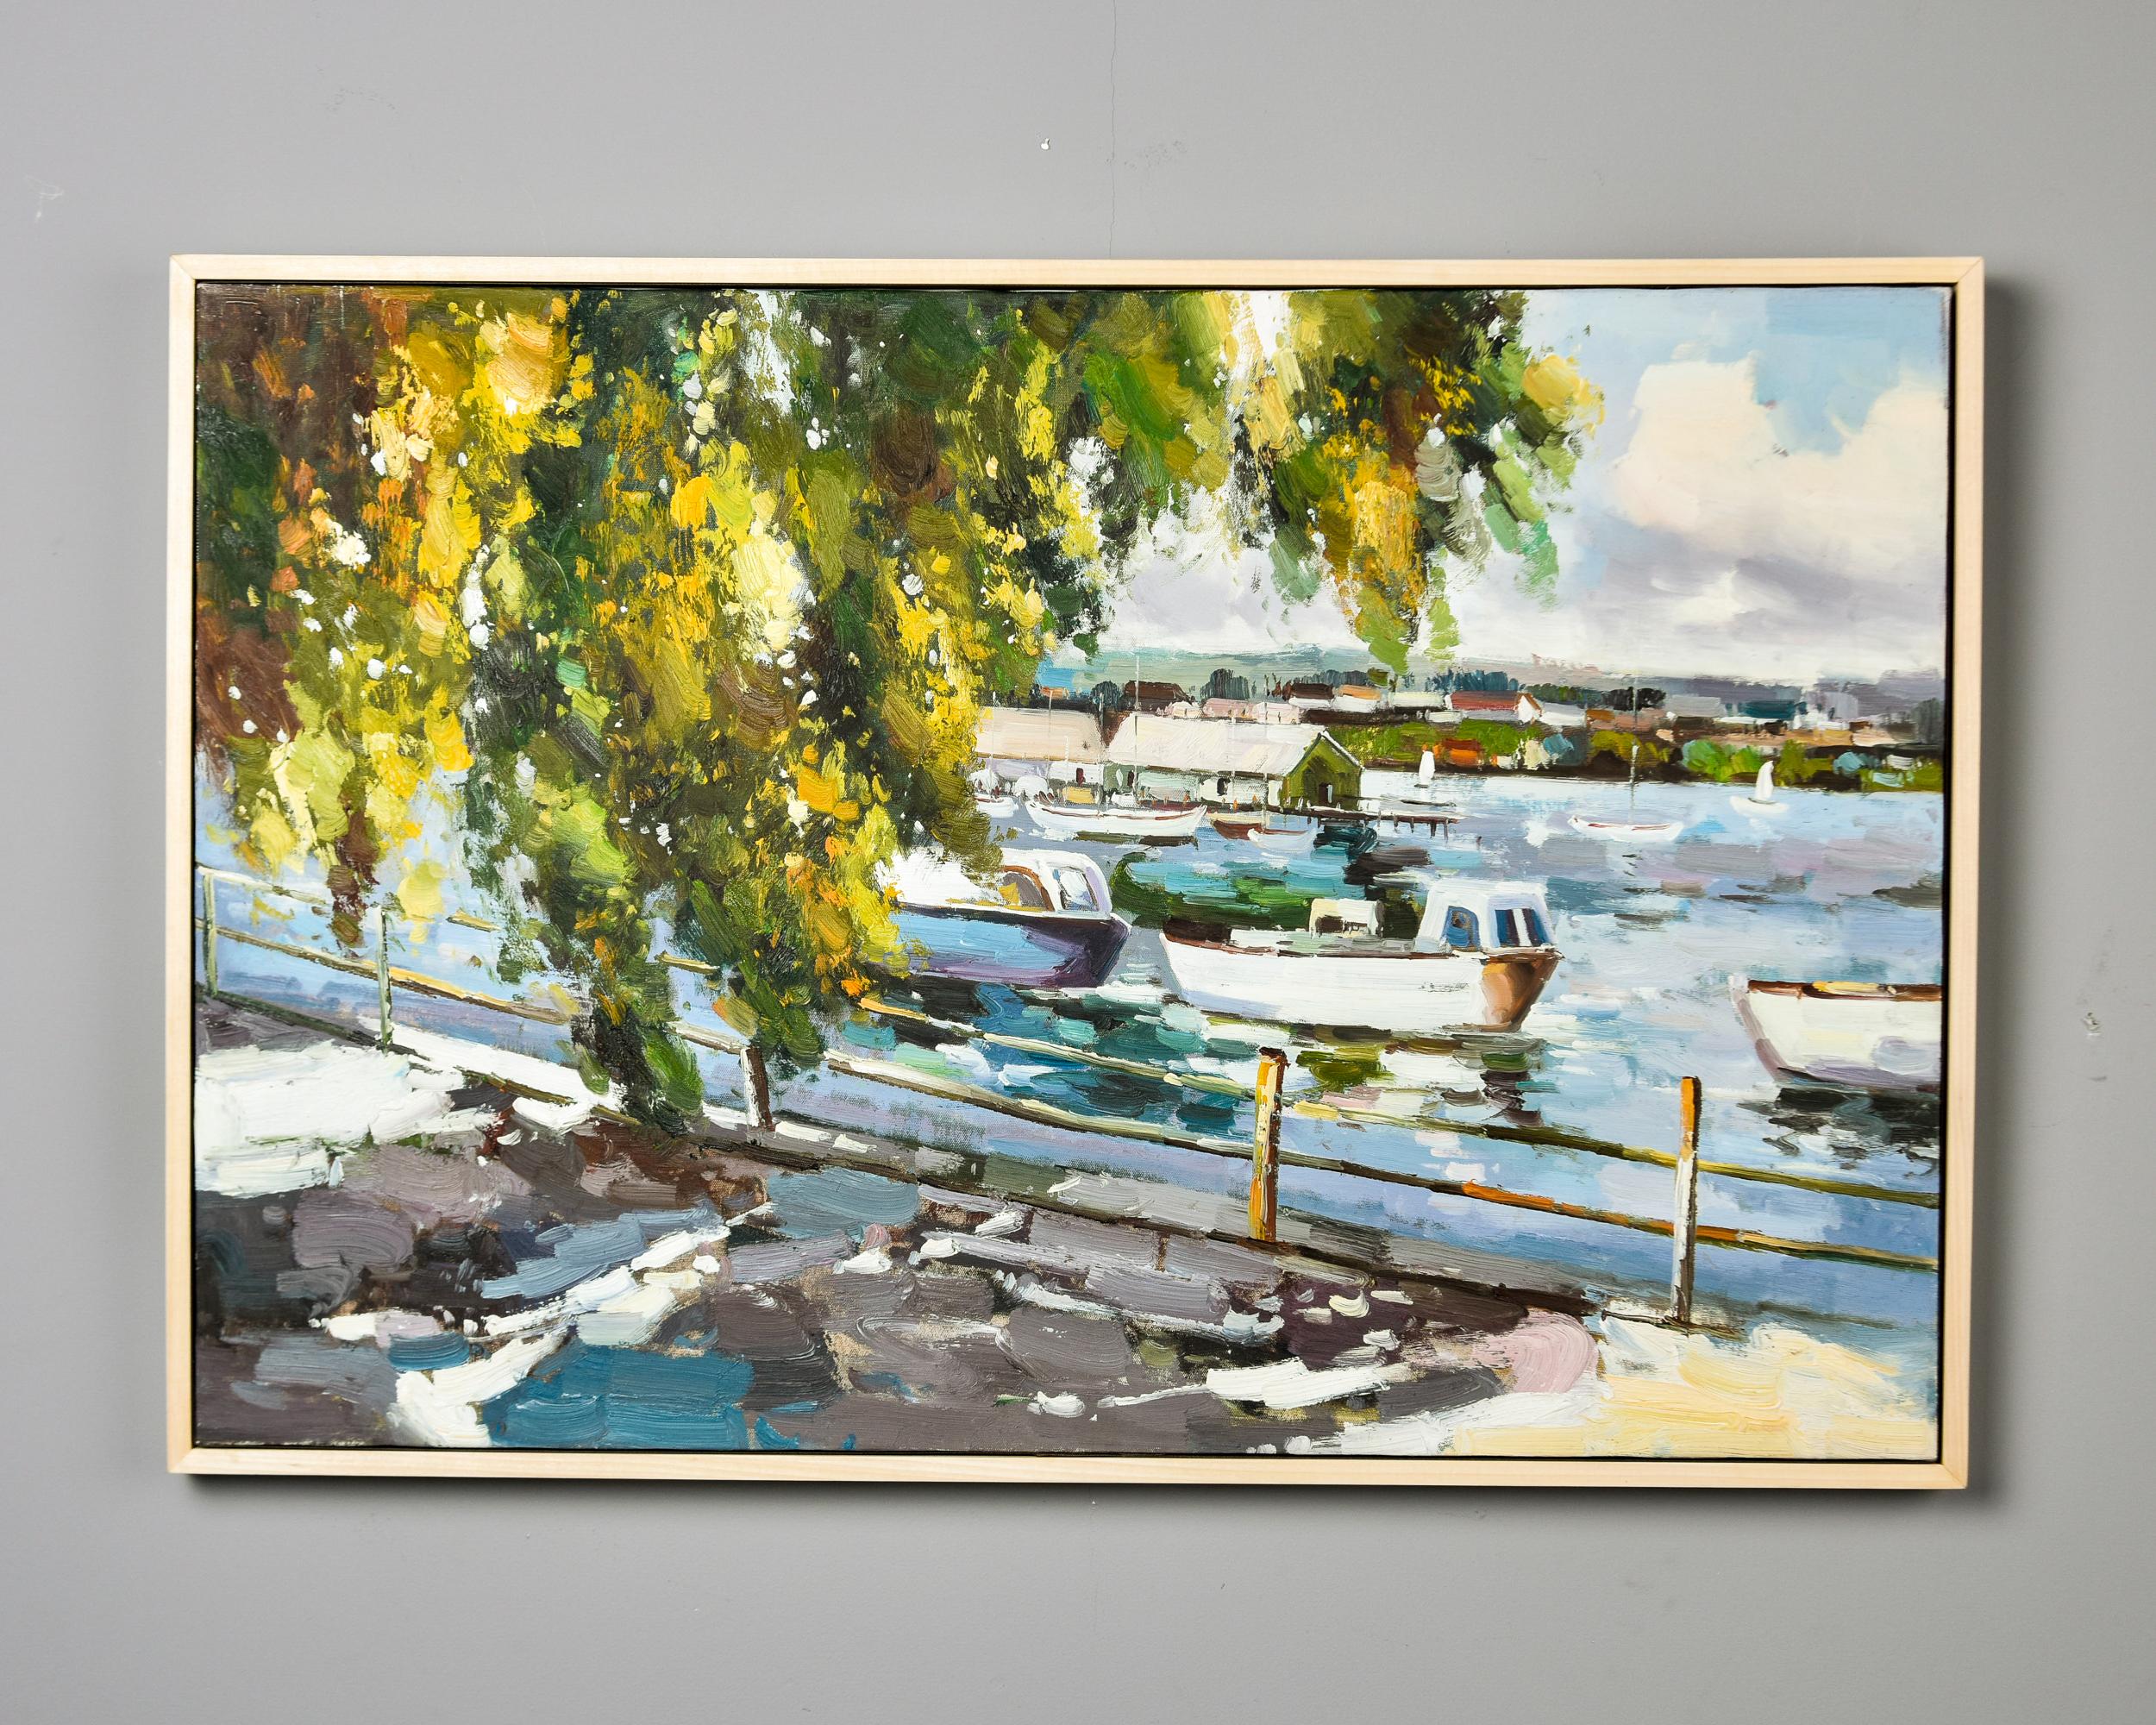 American Vintage Framed Large Oil Painting on Canvas Depicting Boats in Harbor For Sale